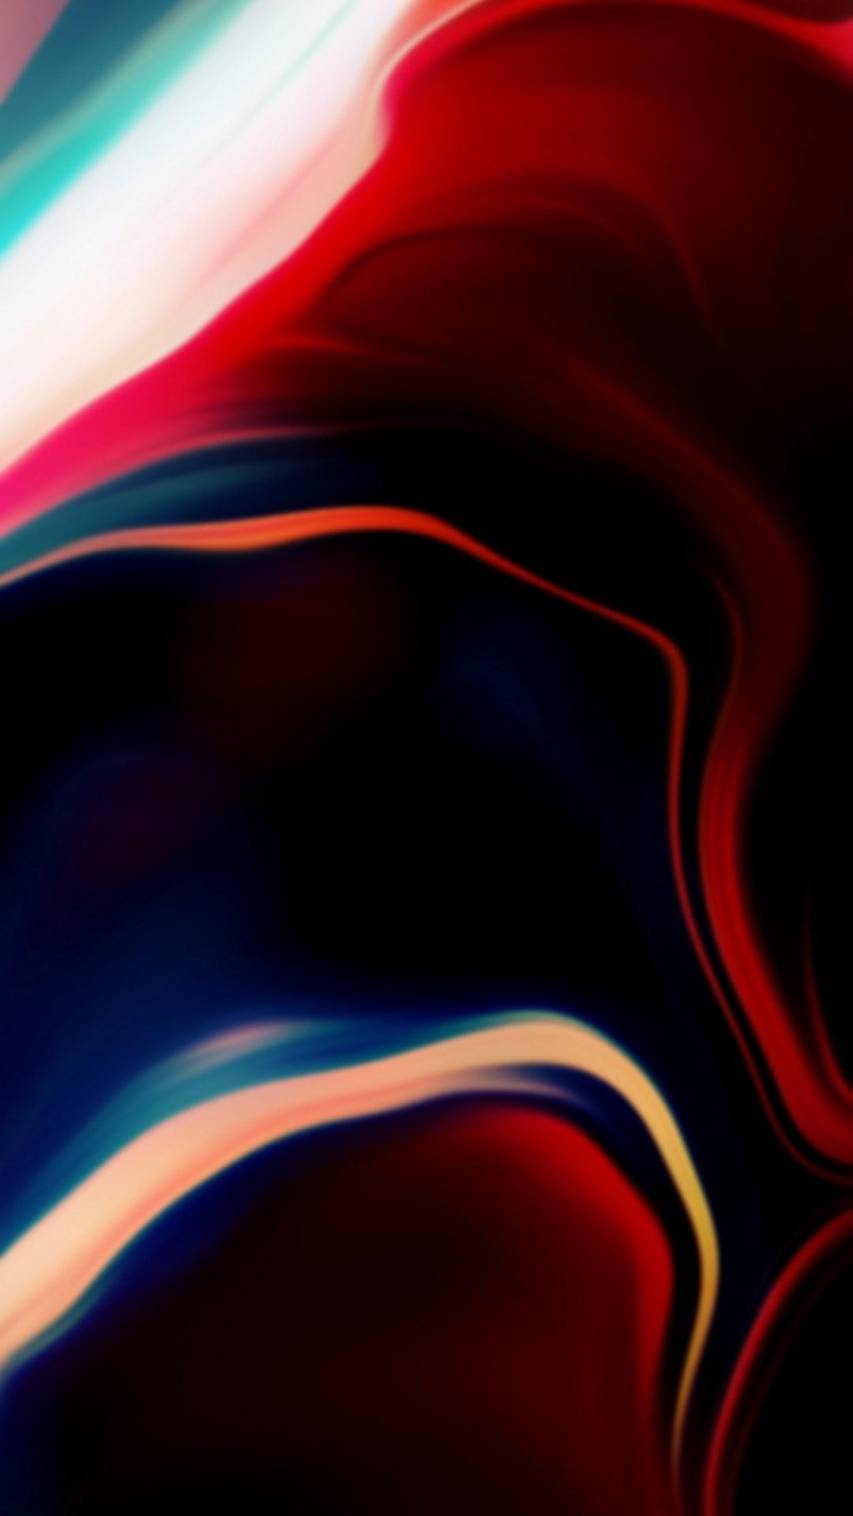 Abstract iPhone 5s Wallpaper, Greatest image